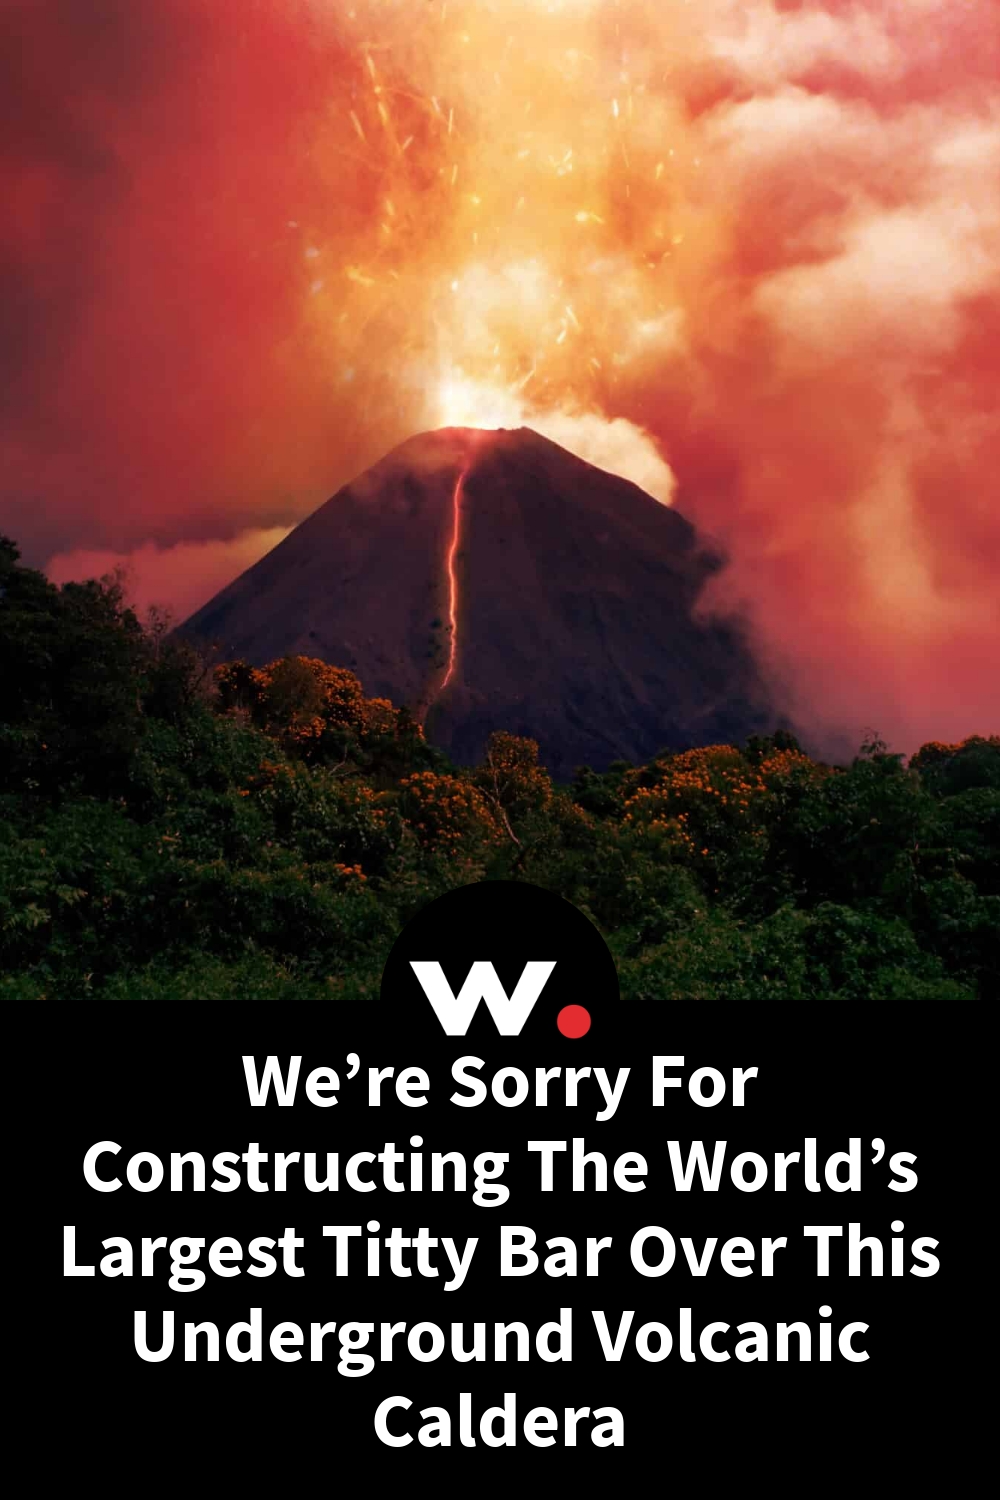 We’re Sorry For Constructing The World’s Largest Titty Bar Over This Underground Volcanic Caldera